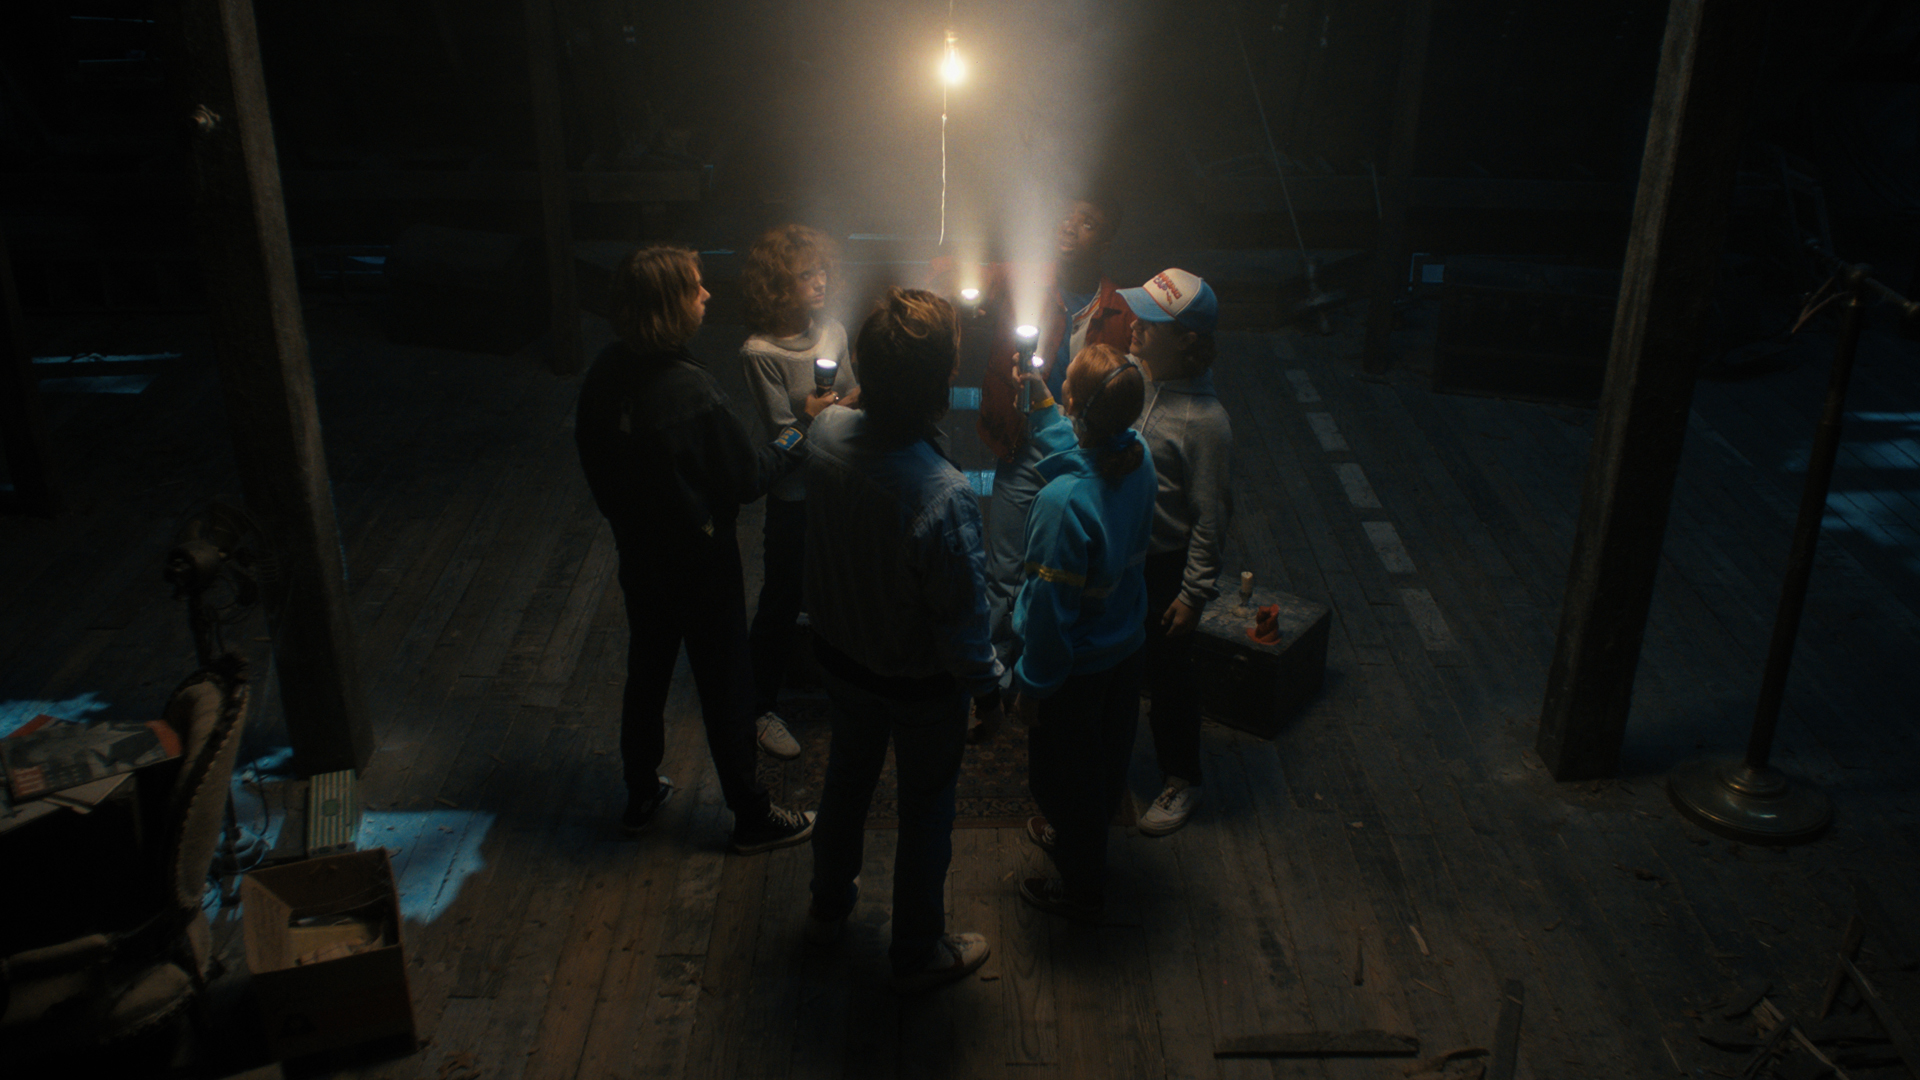 The Hawkins gang investigate Creel House, one of the main locations in Stranger Things season 4